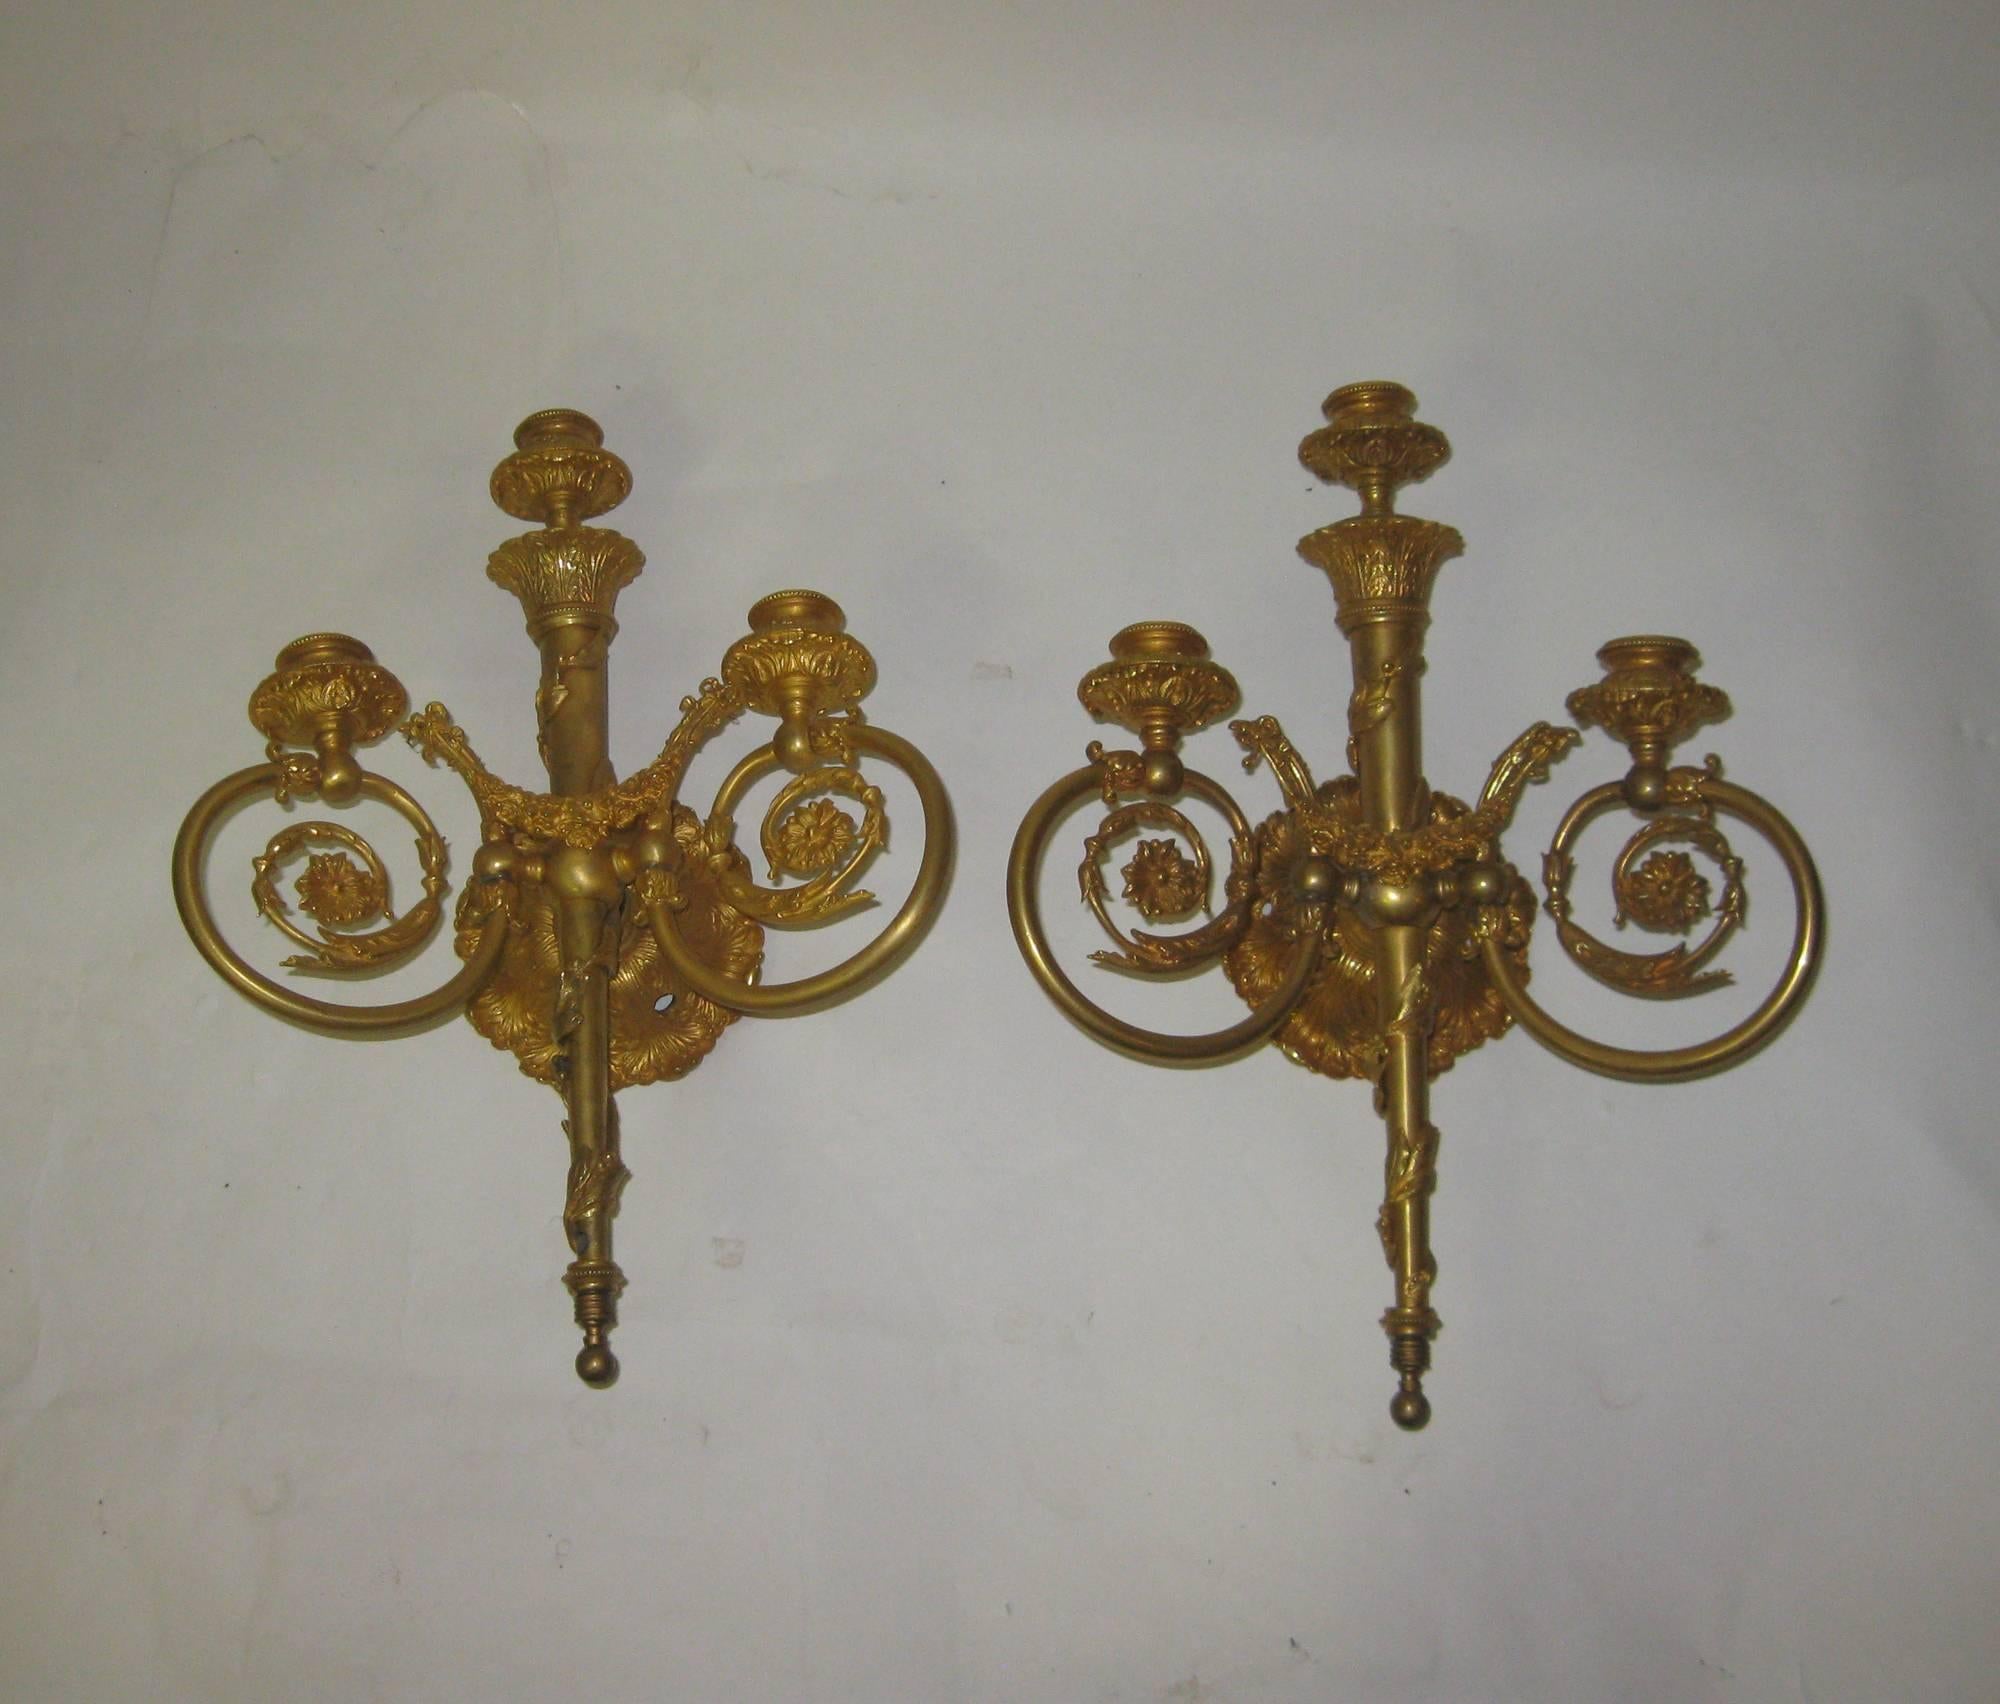 20th century Pair of French Bronze Doré Sconces For Sale 3